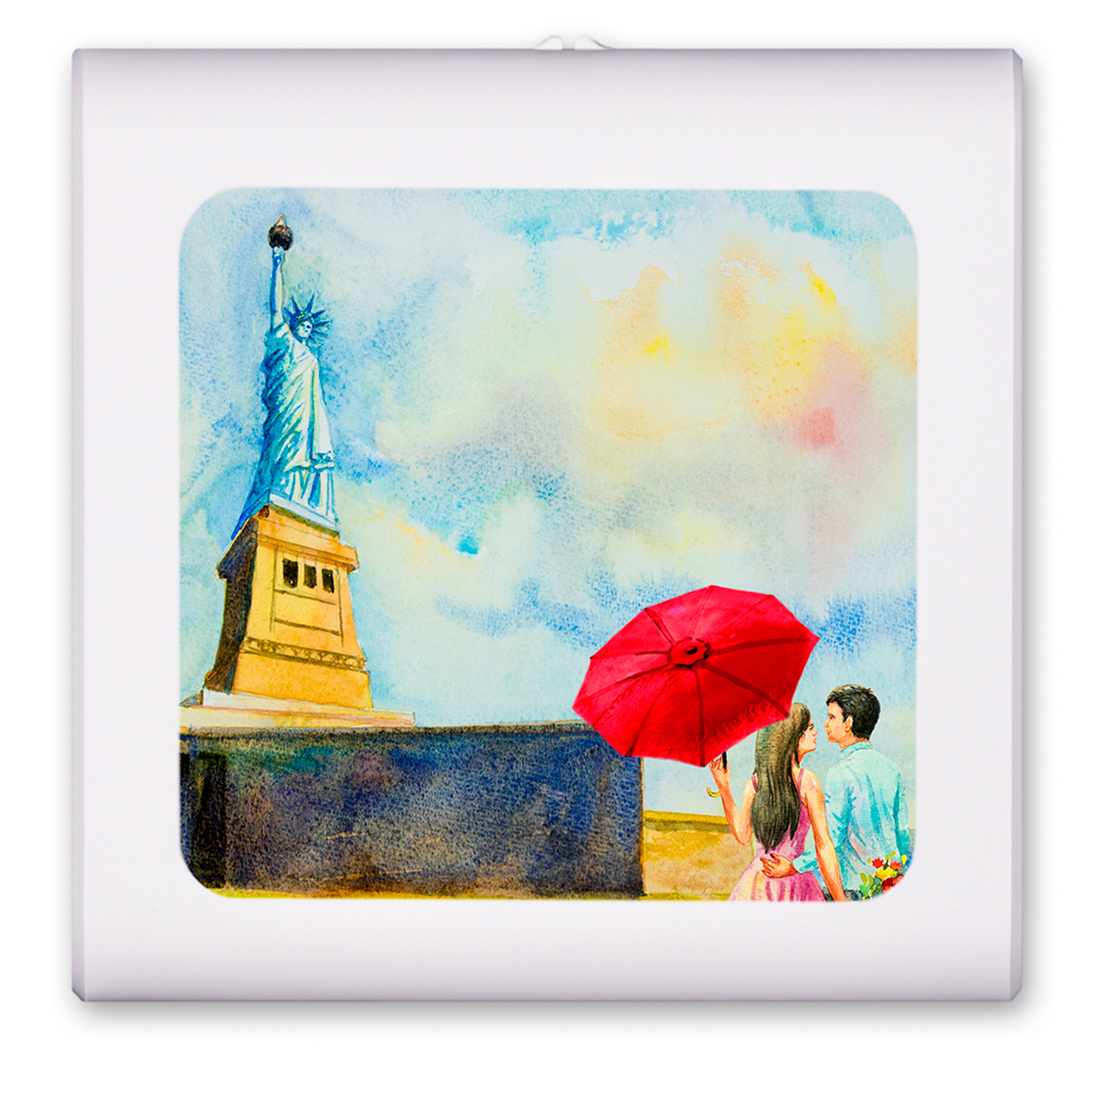 Statue of Liberty Painting - #2717